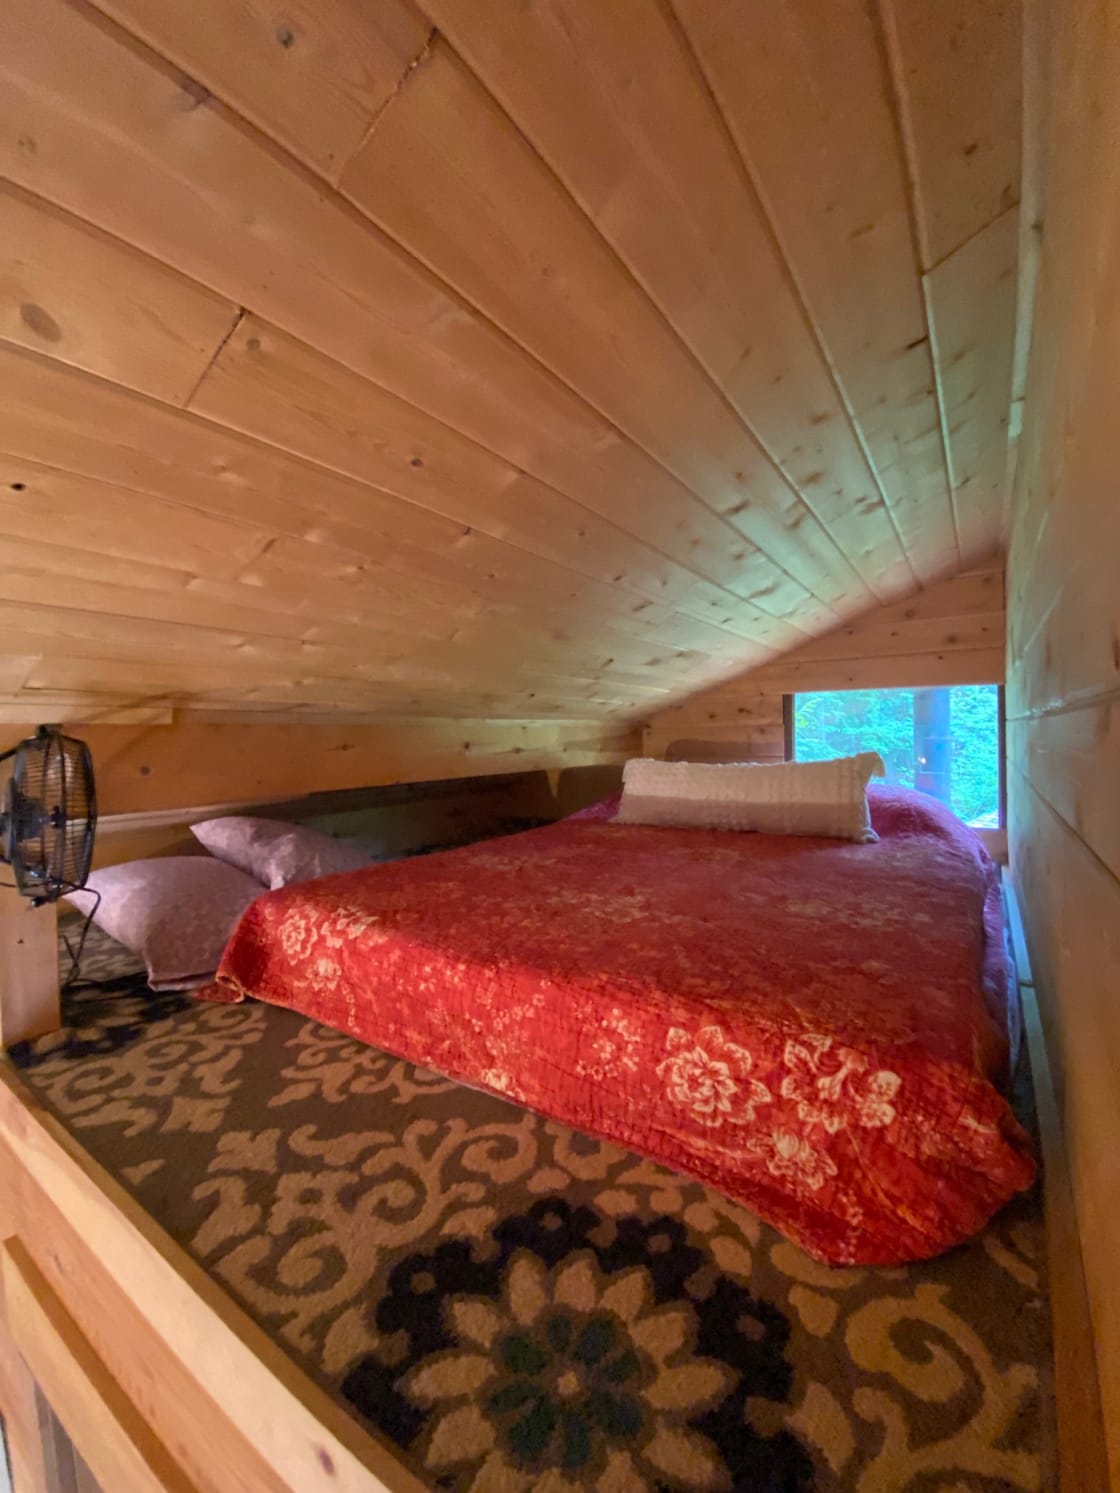 The loft double/full bed.